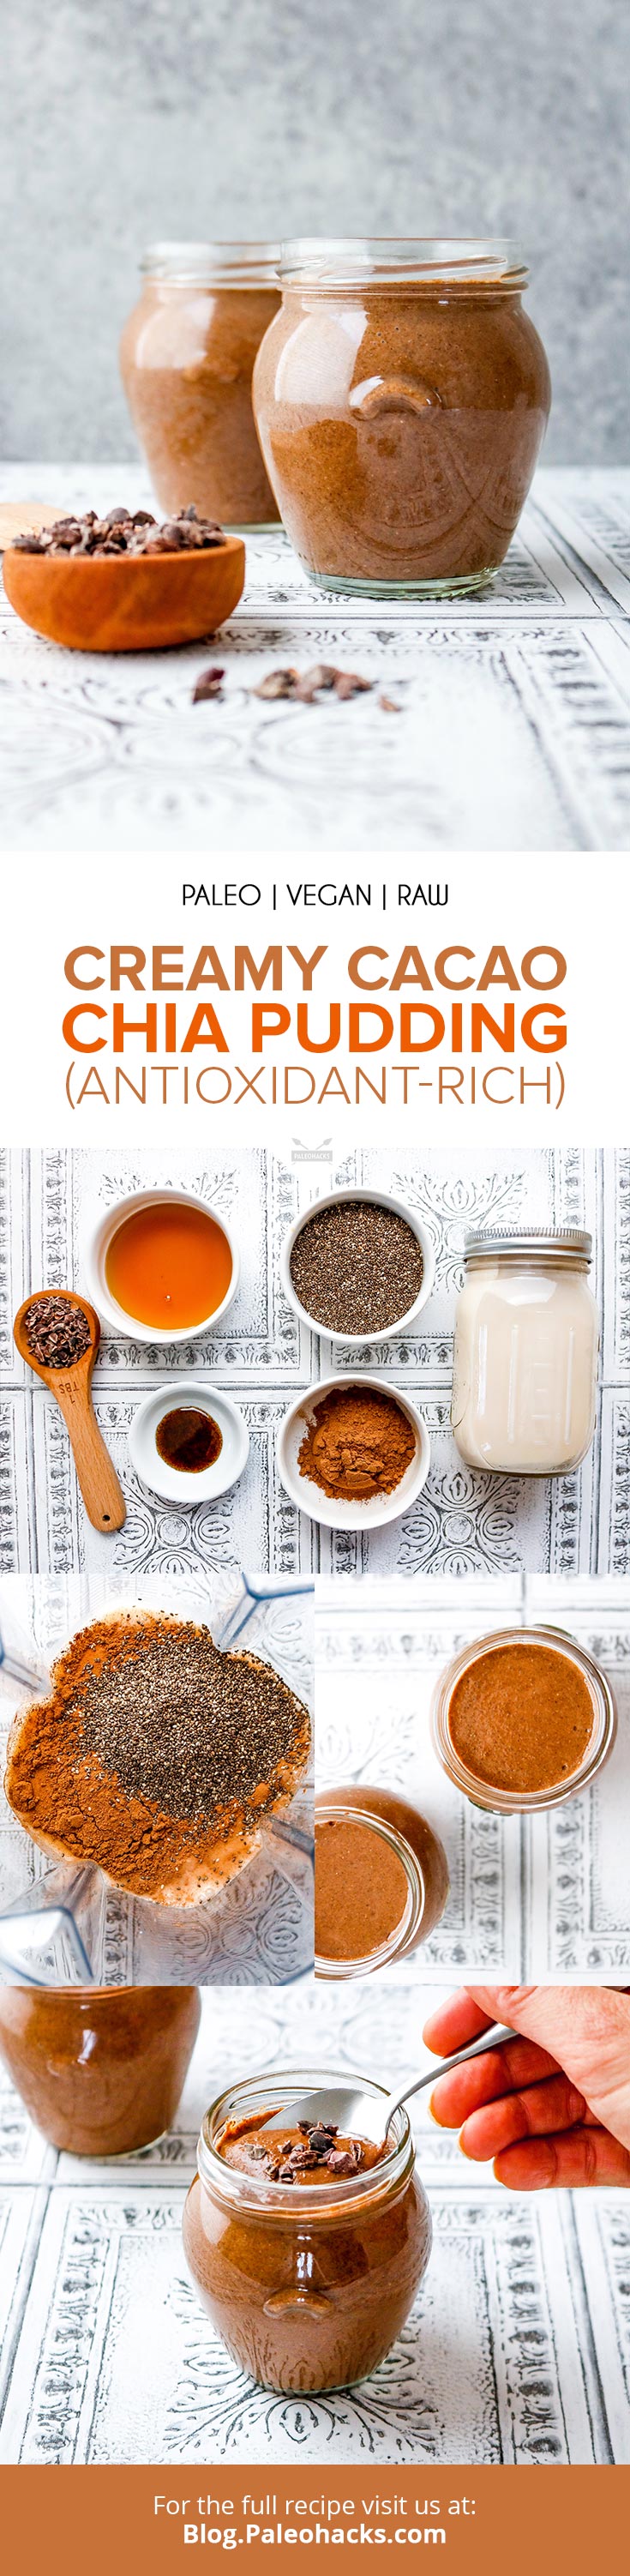 Forget waiting overnight, this chia pudding is a creamy treat you can enjoy in just 30 minutes. You only need a blender to get started!